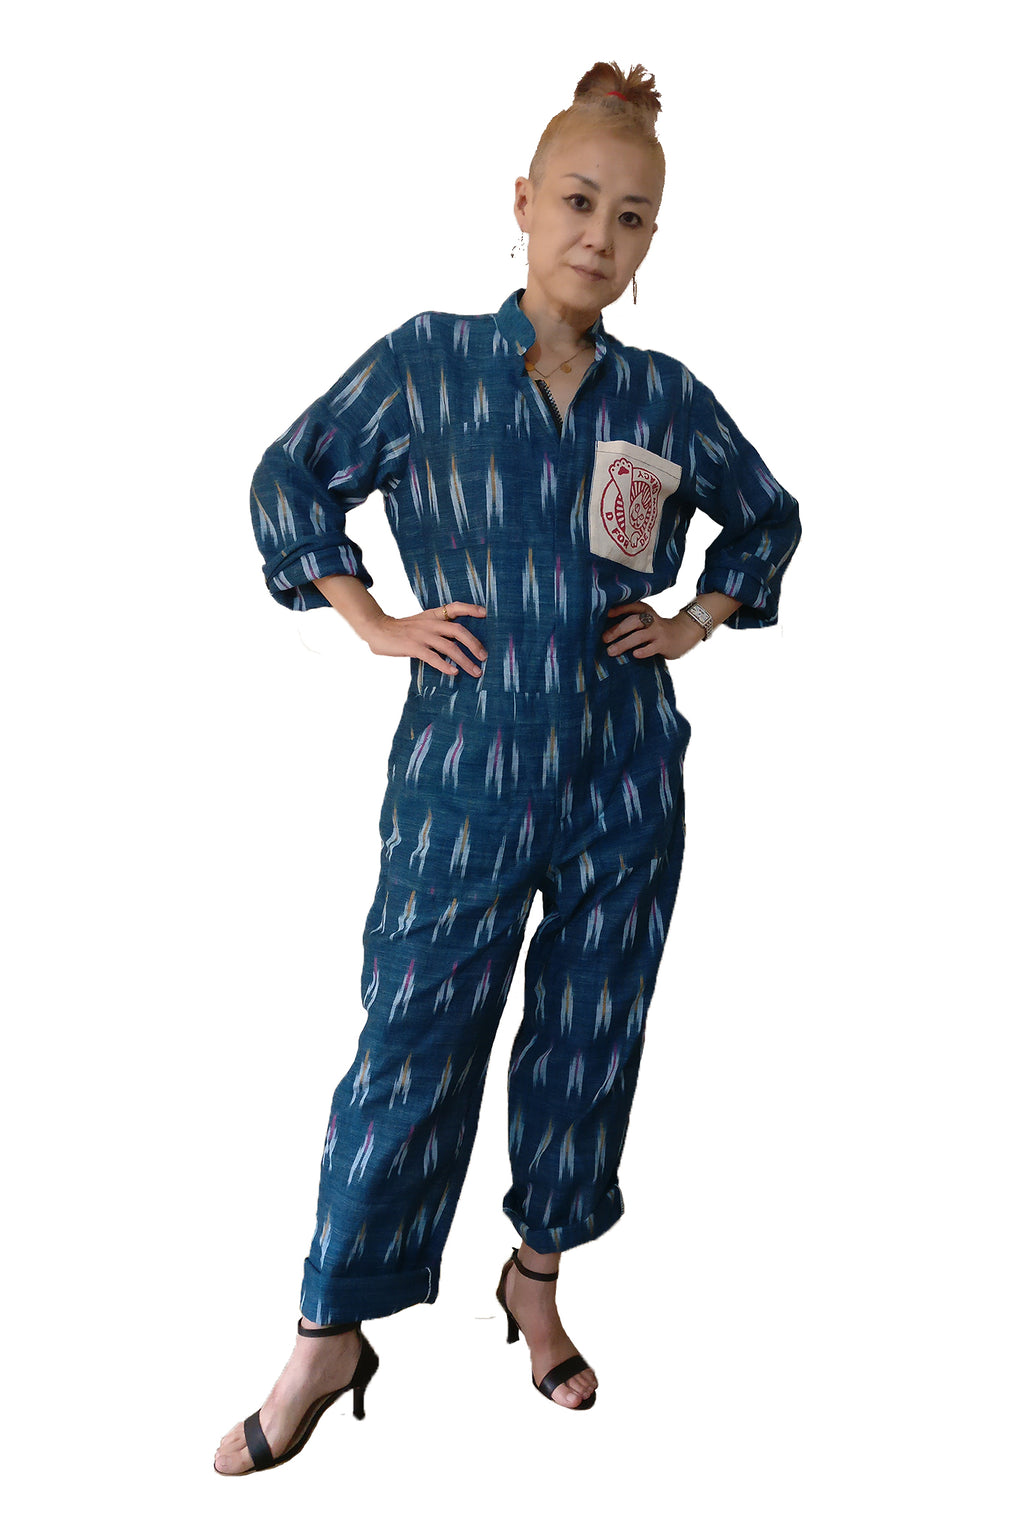 Classic boiler suit (coverall) for daily wear with an Indian traditional fabric, blue handloom cotton Ikat, for all the bodies (unisex) and body types! The oversized silhouette gives cool vibes. If you love jumpsuits, definitely try this! Shop online. - Woman model